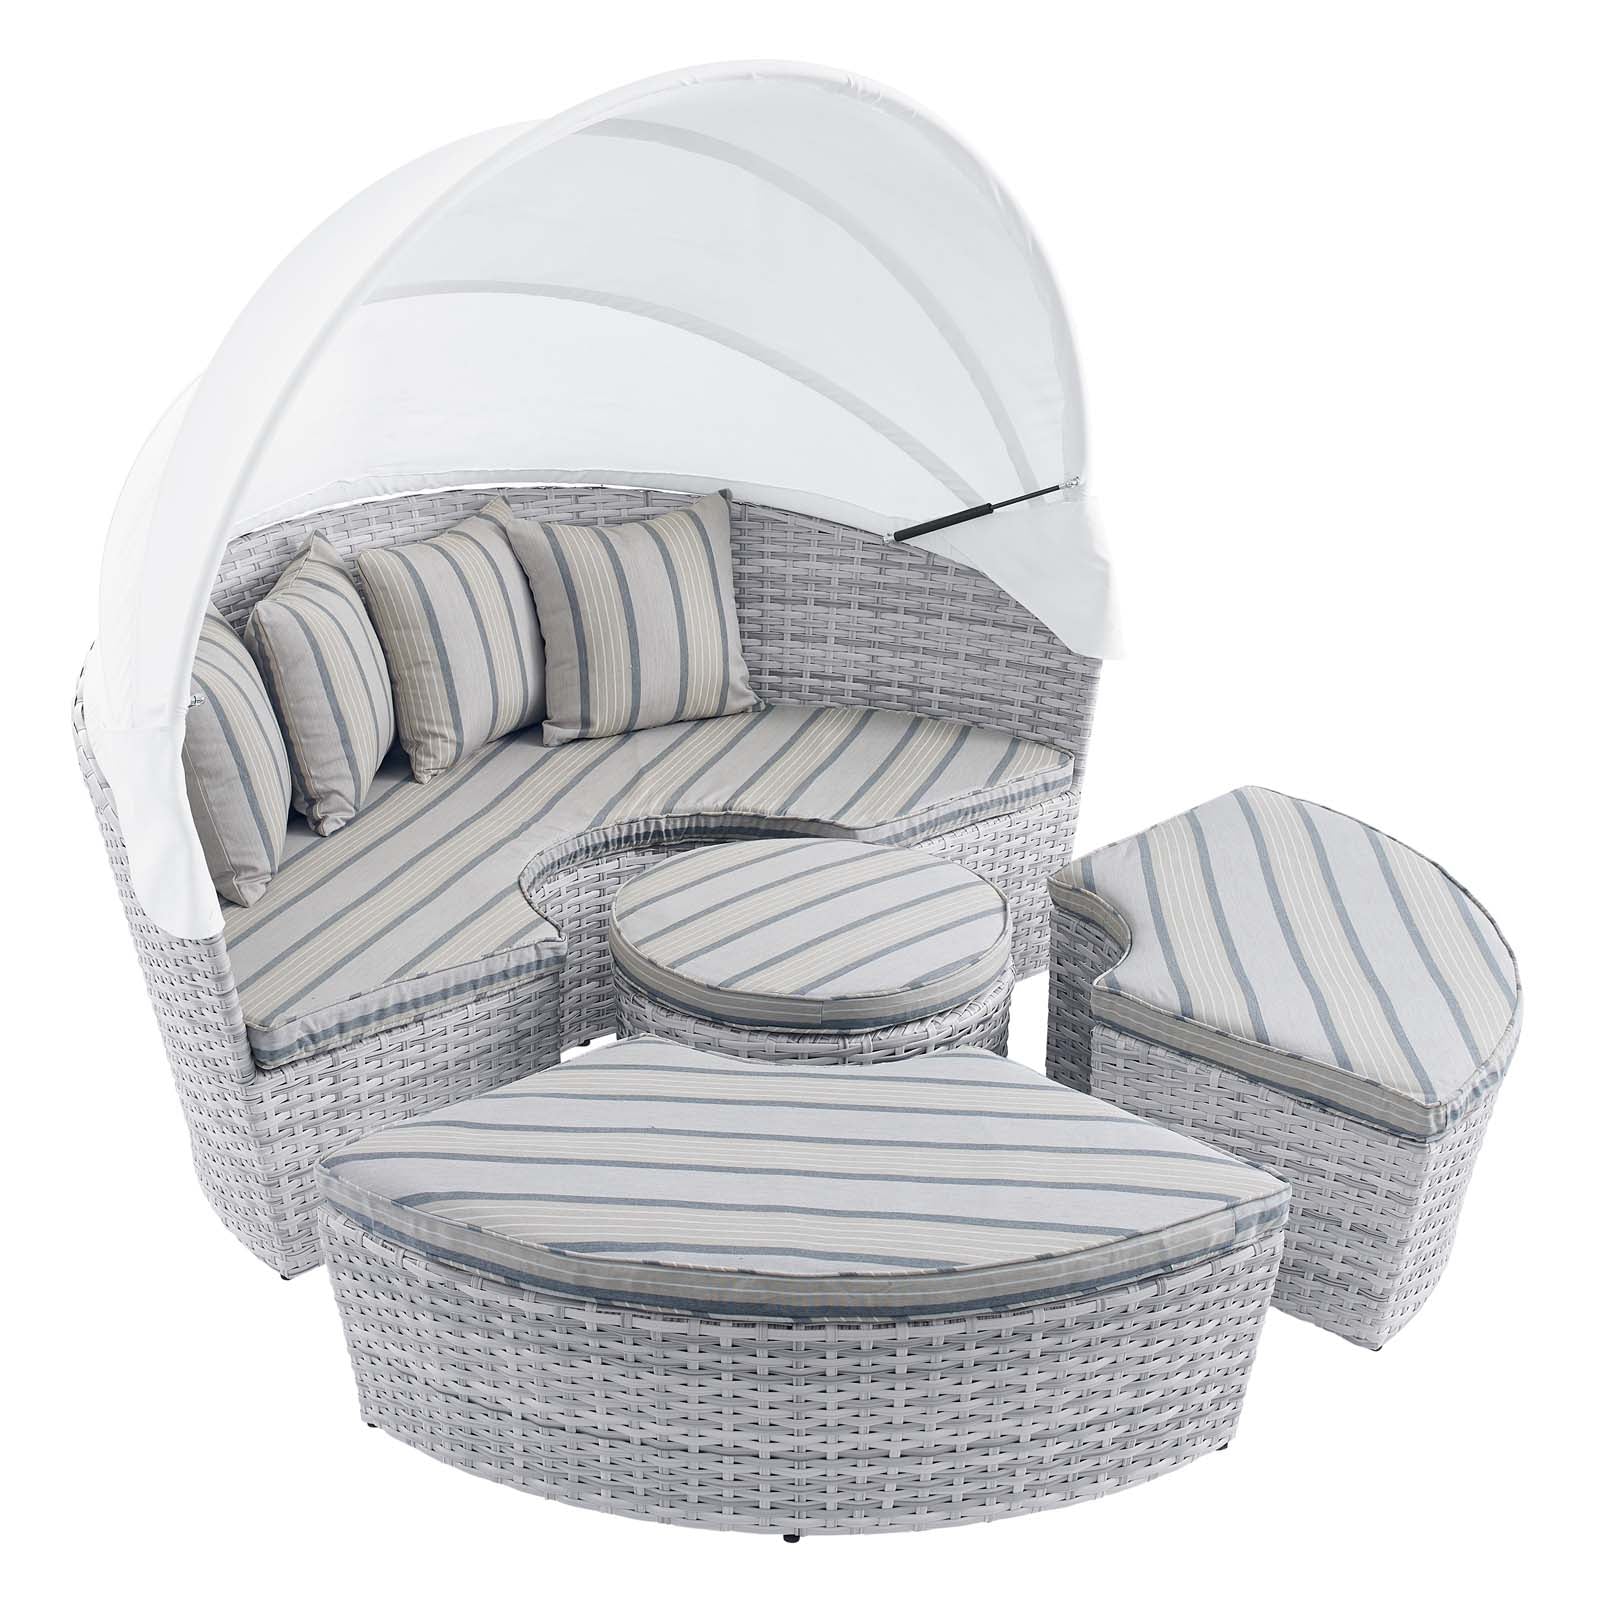 Modway Patio Daybeds - Scottsdale Canopy Sunbrella Outdoor Patio Daybed Light Gray Pebble